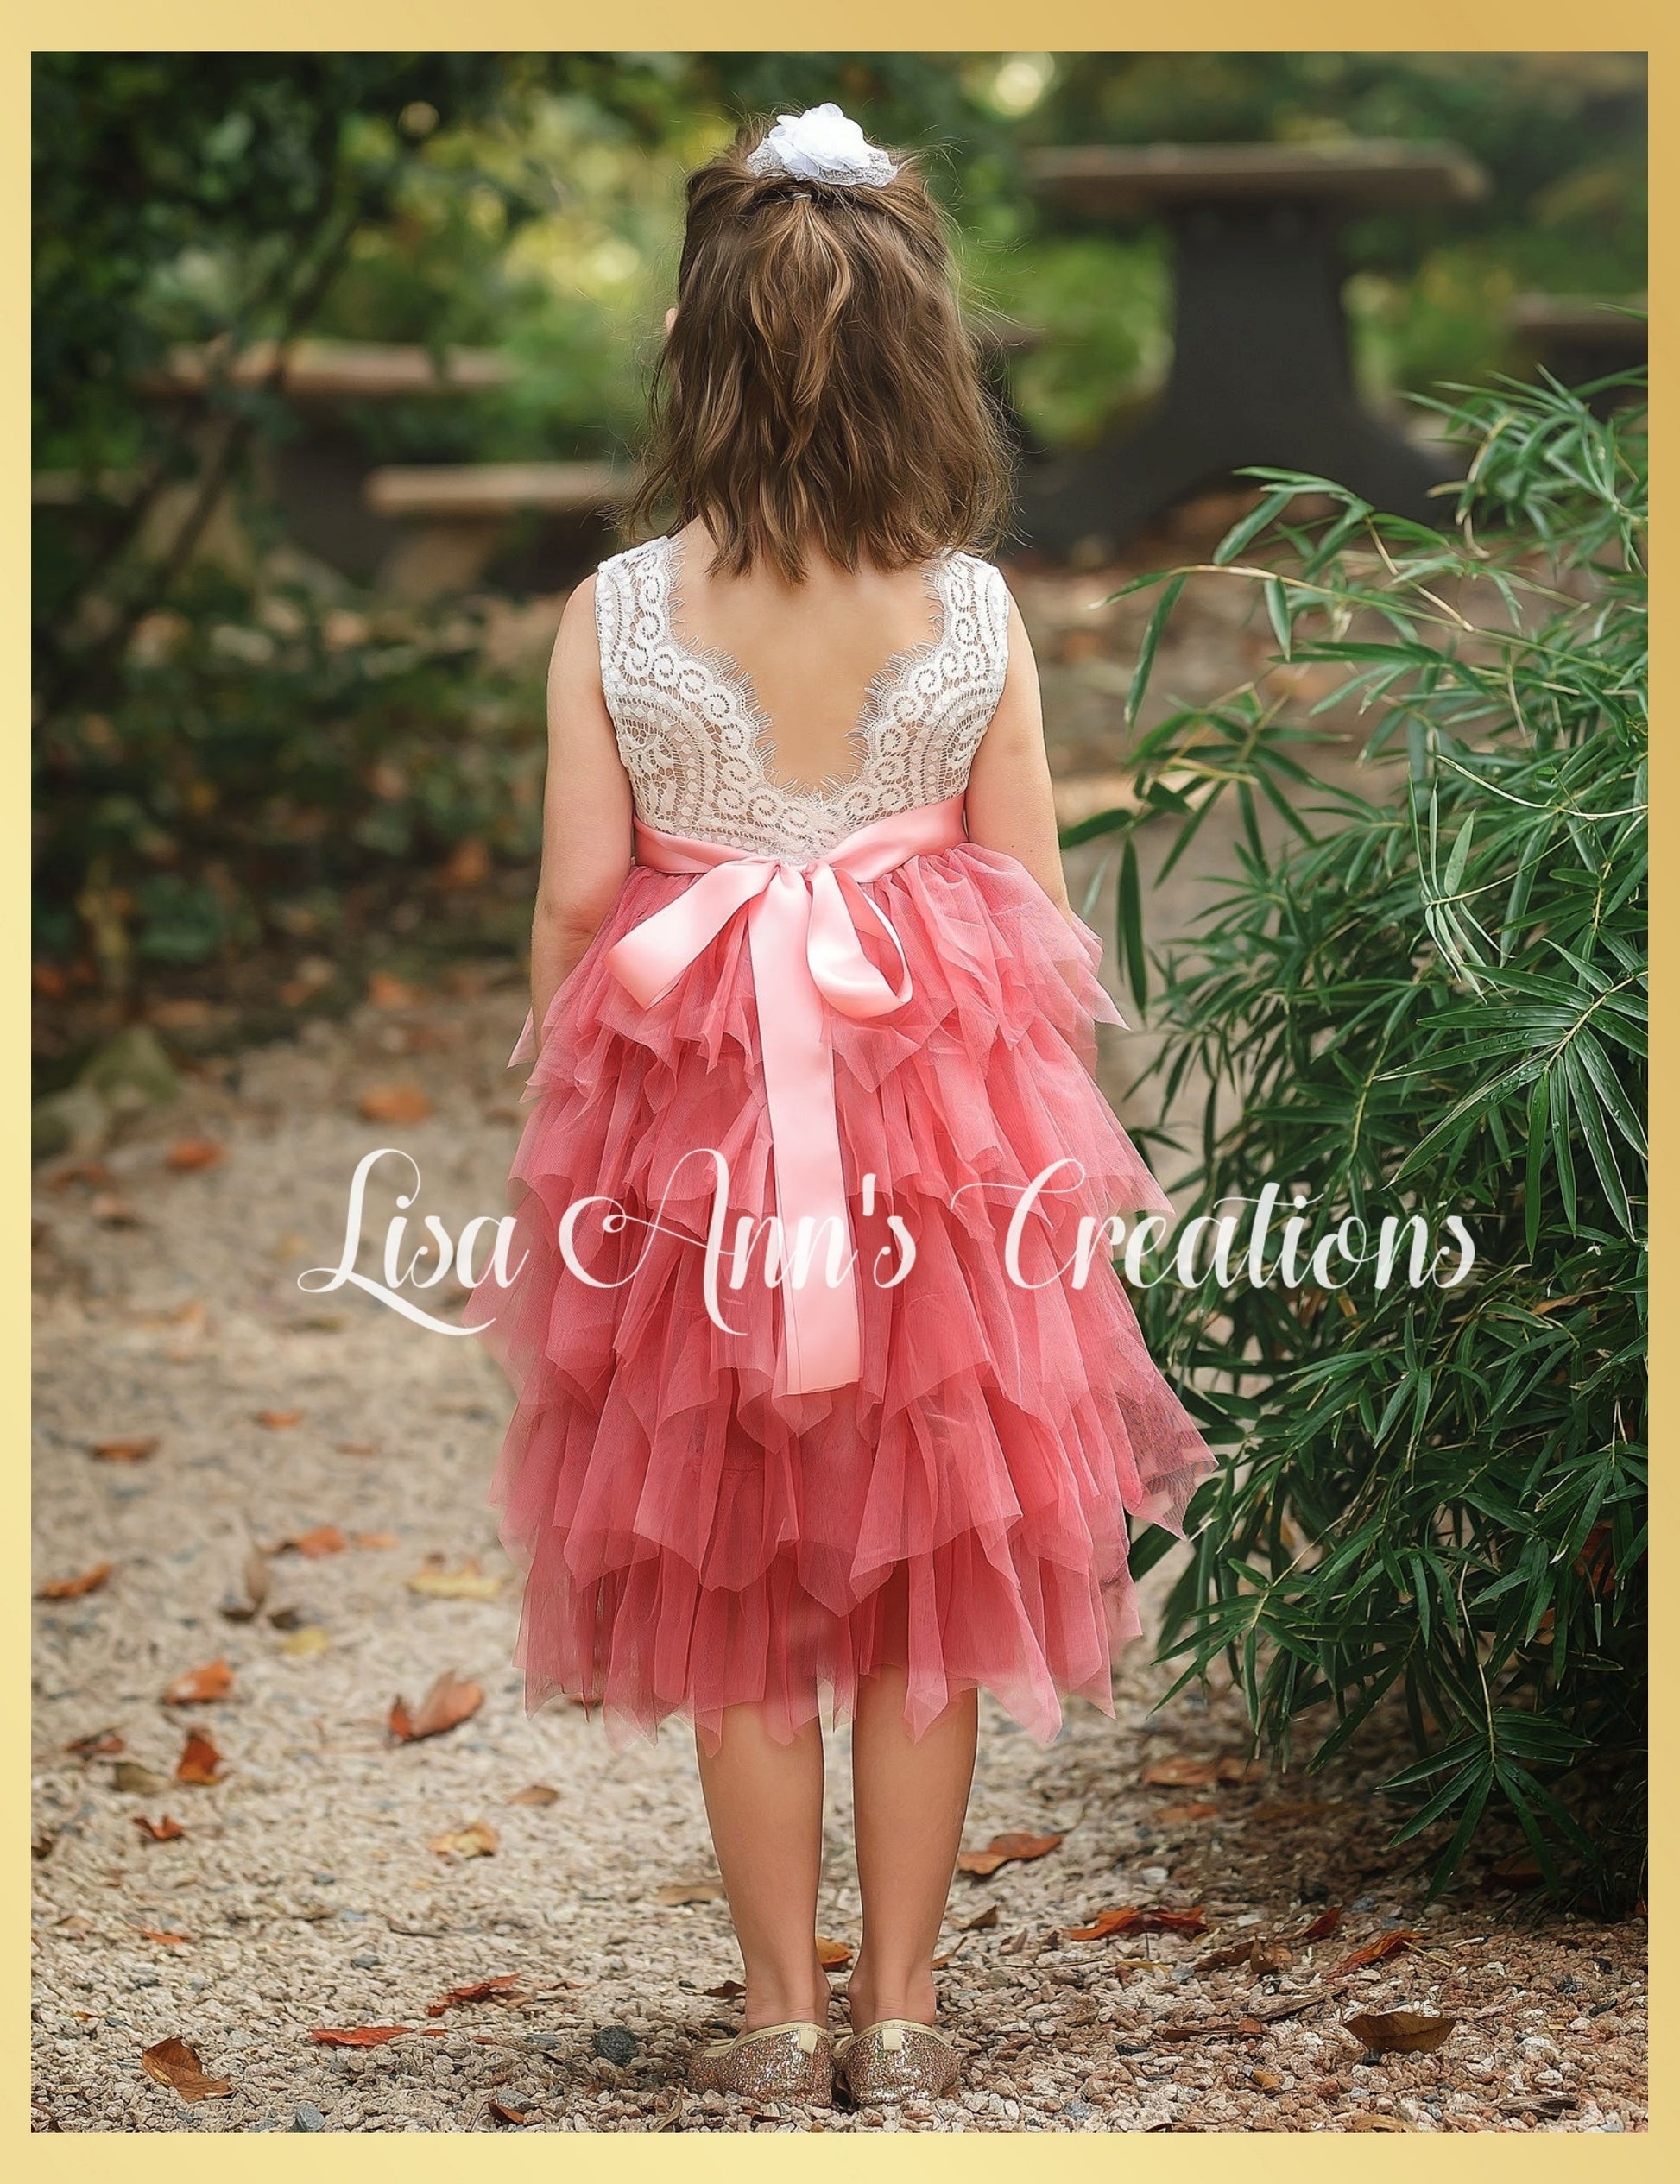 open back v shaped flower girl dress in dusty rose tulle with white lace that is knee length